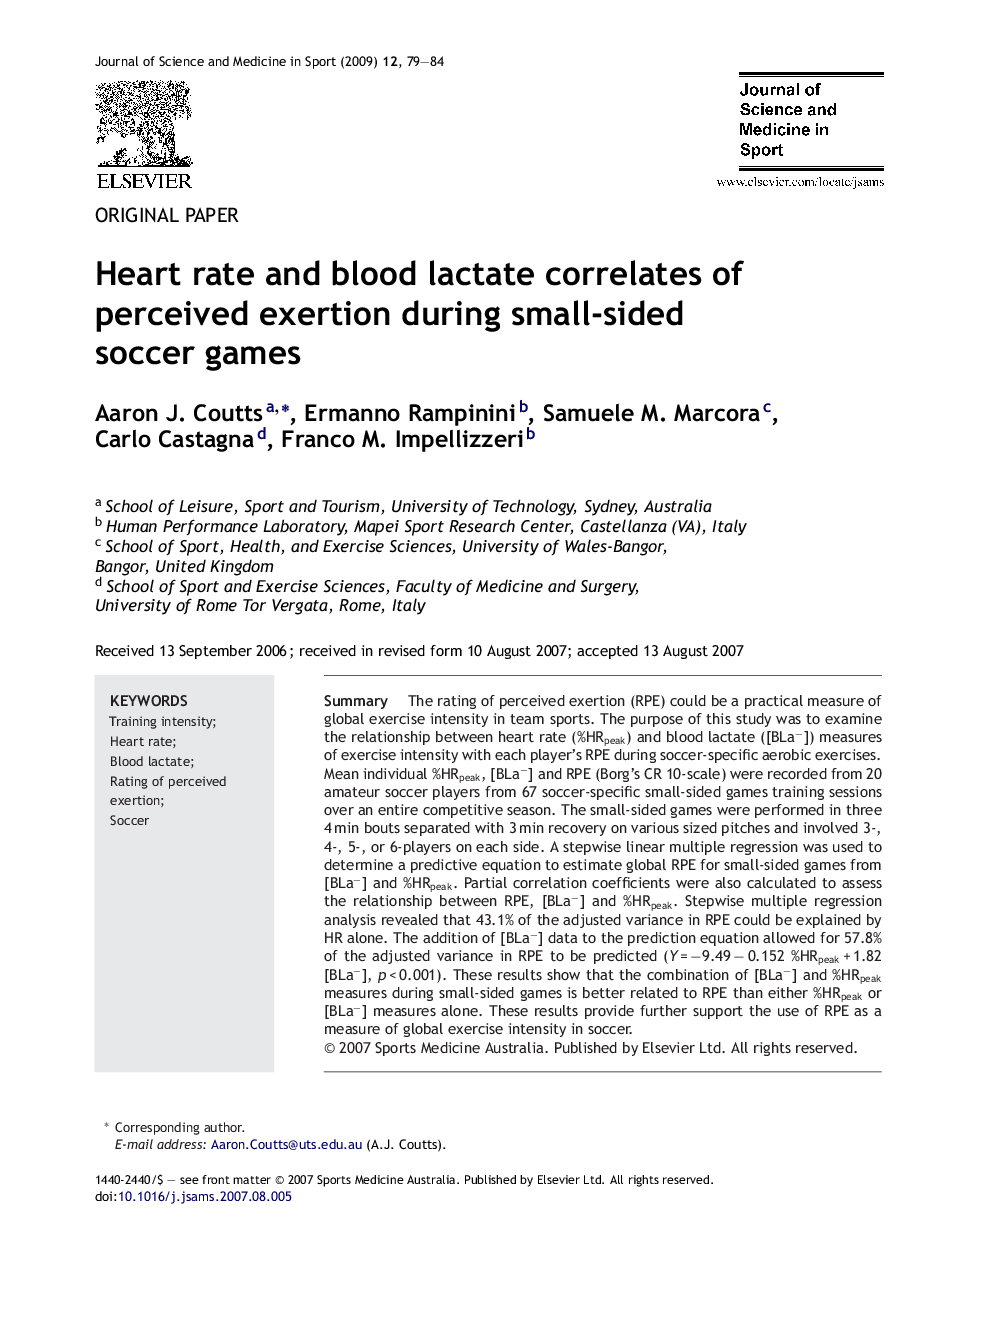 Heart rate and blood lactate correlates of perceived exertion during small-sided soccer games